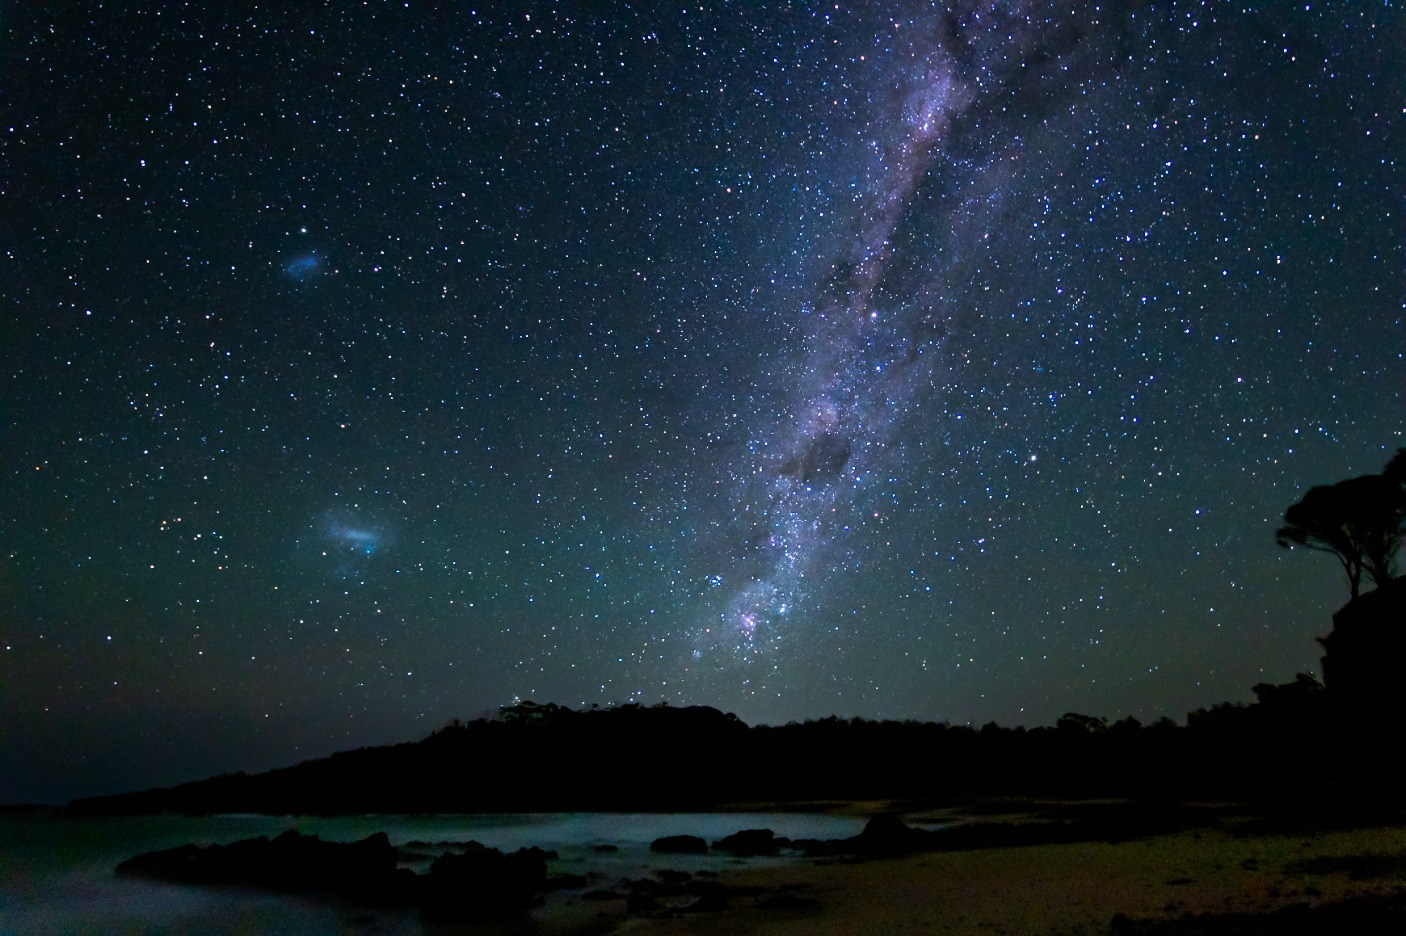 The Milky way view from Billy Beach